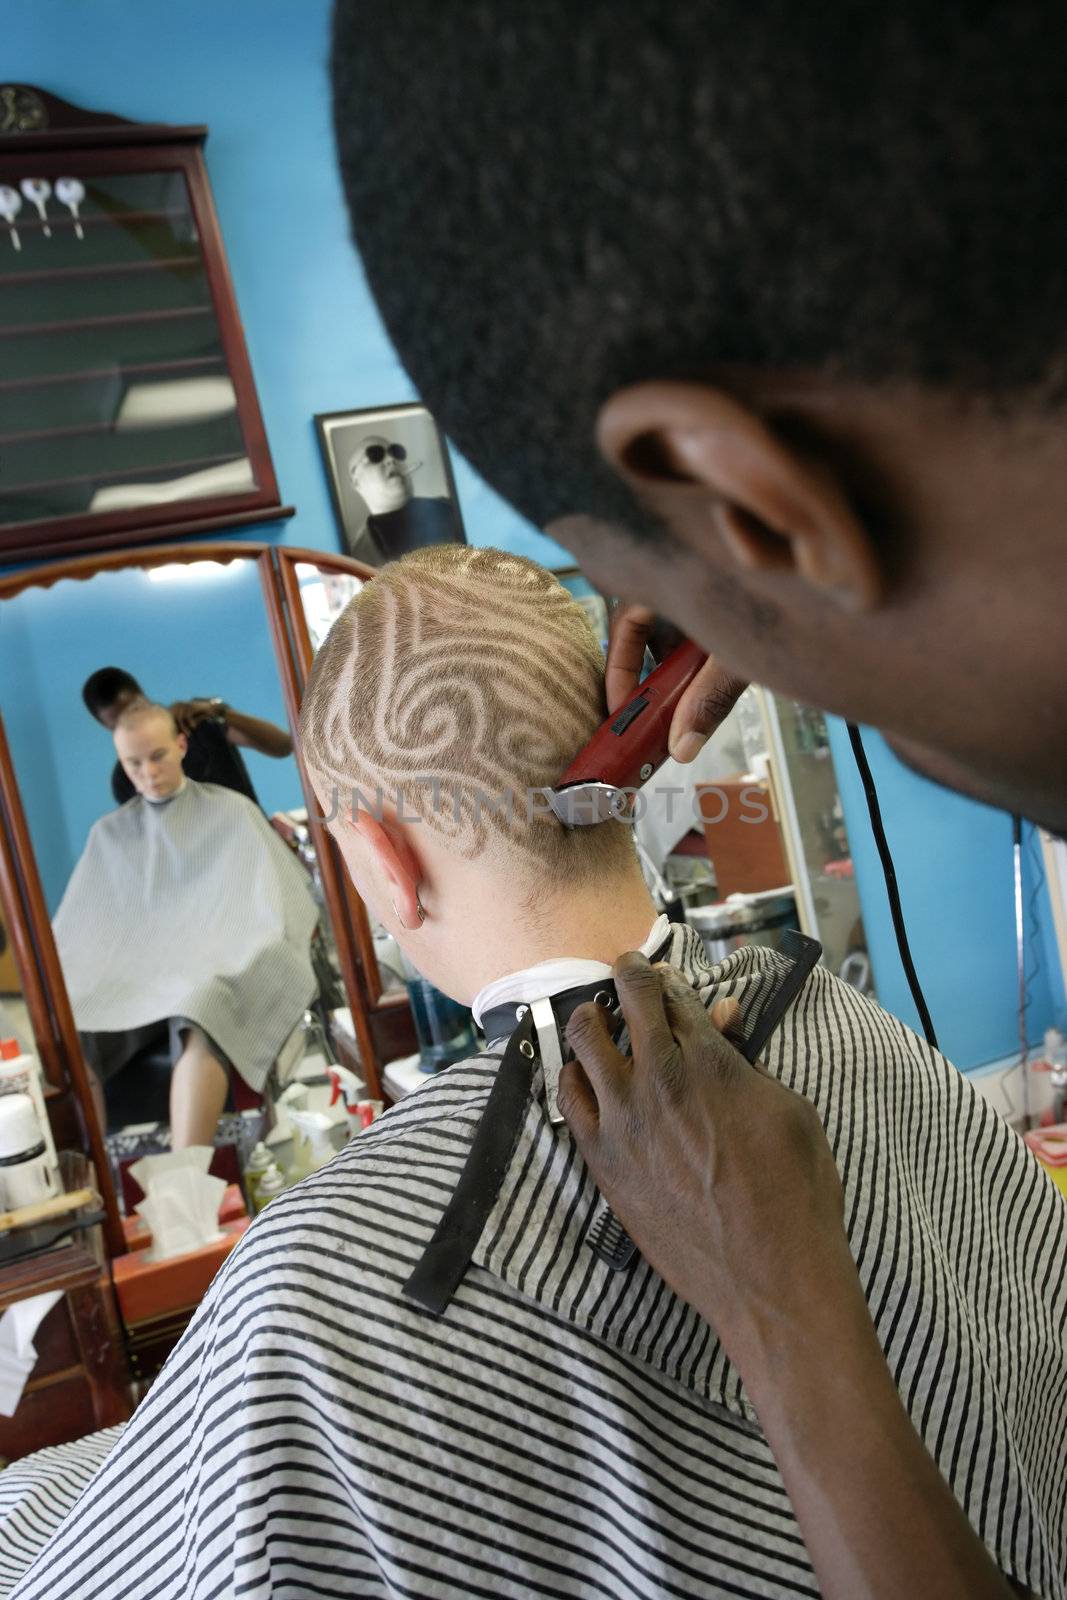 A barber cutting a pattern into a blond man's short hair. Three model releases attached. Third model release is for the photo in the frame on the wall, which has been edited in from an image from my portfolio. Property is a barbershop and tattoo studio - signed property release attached.
